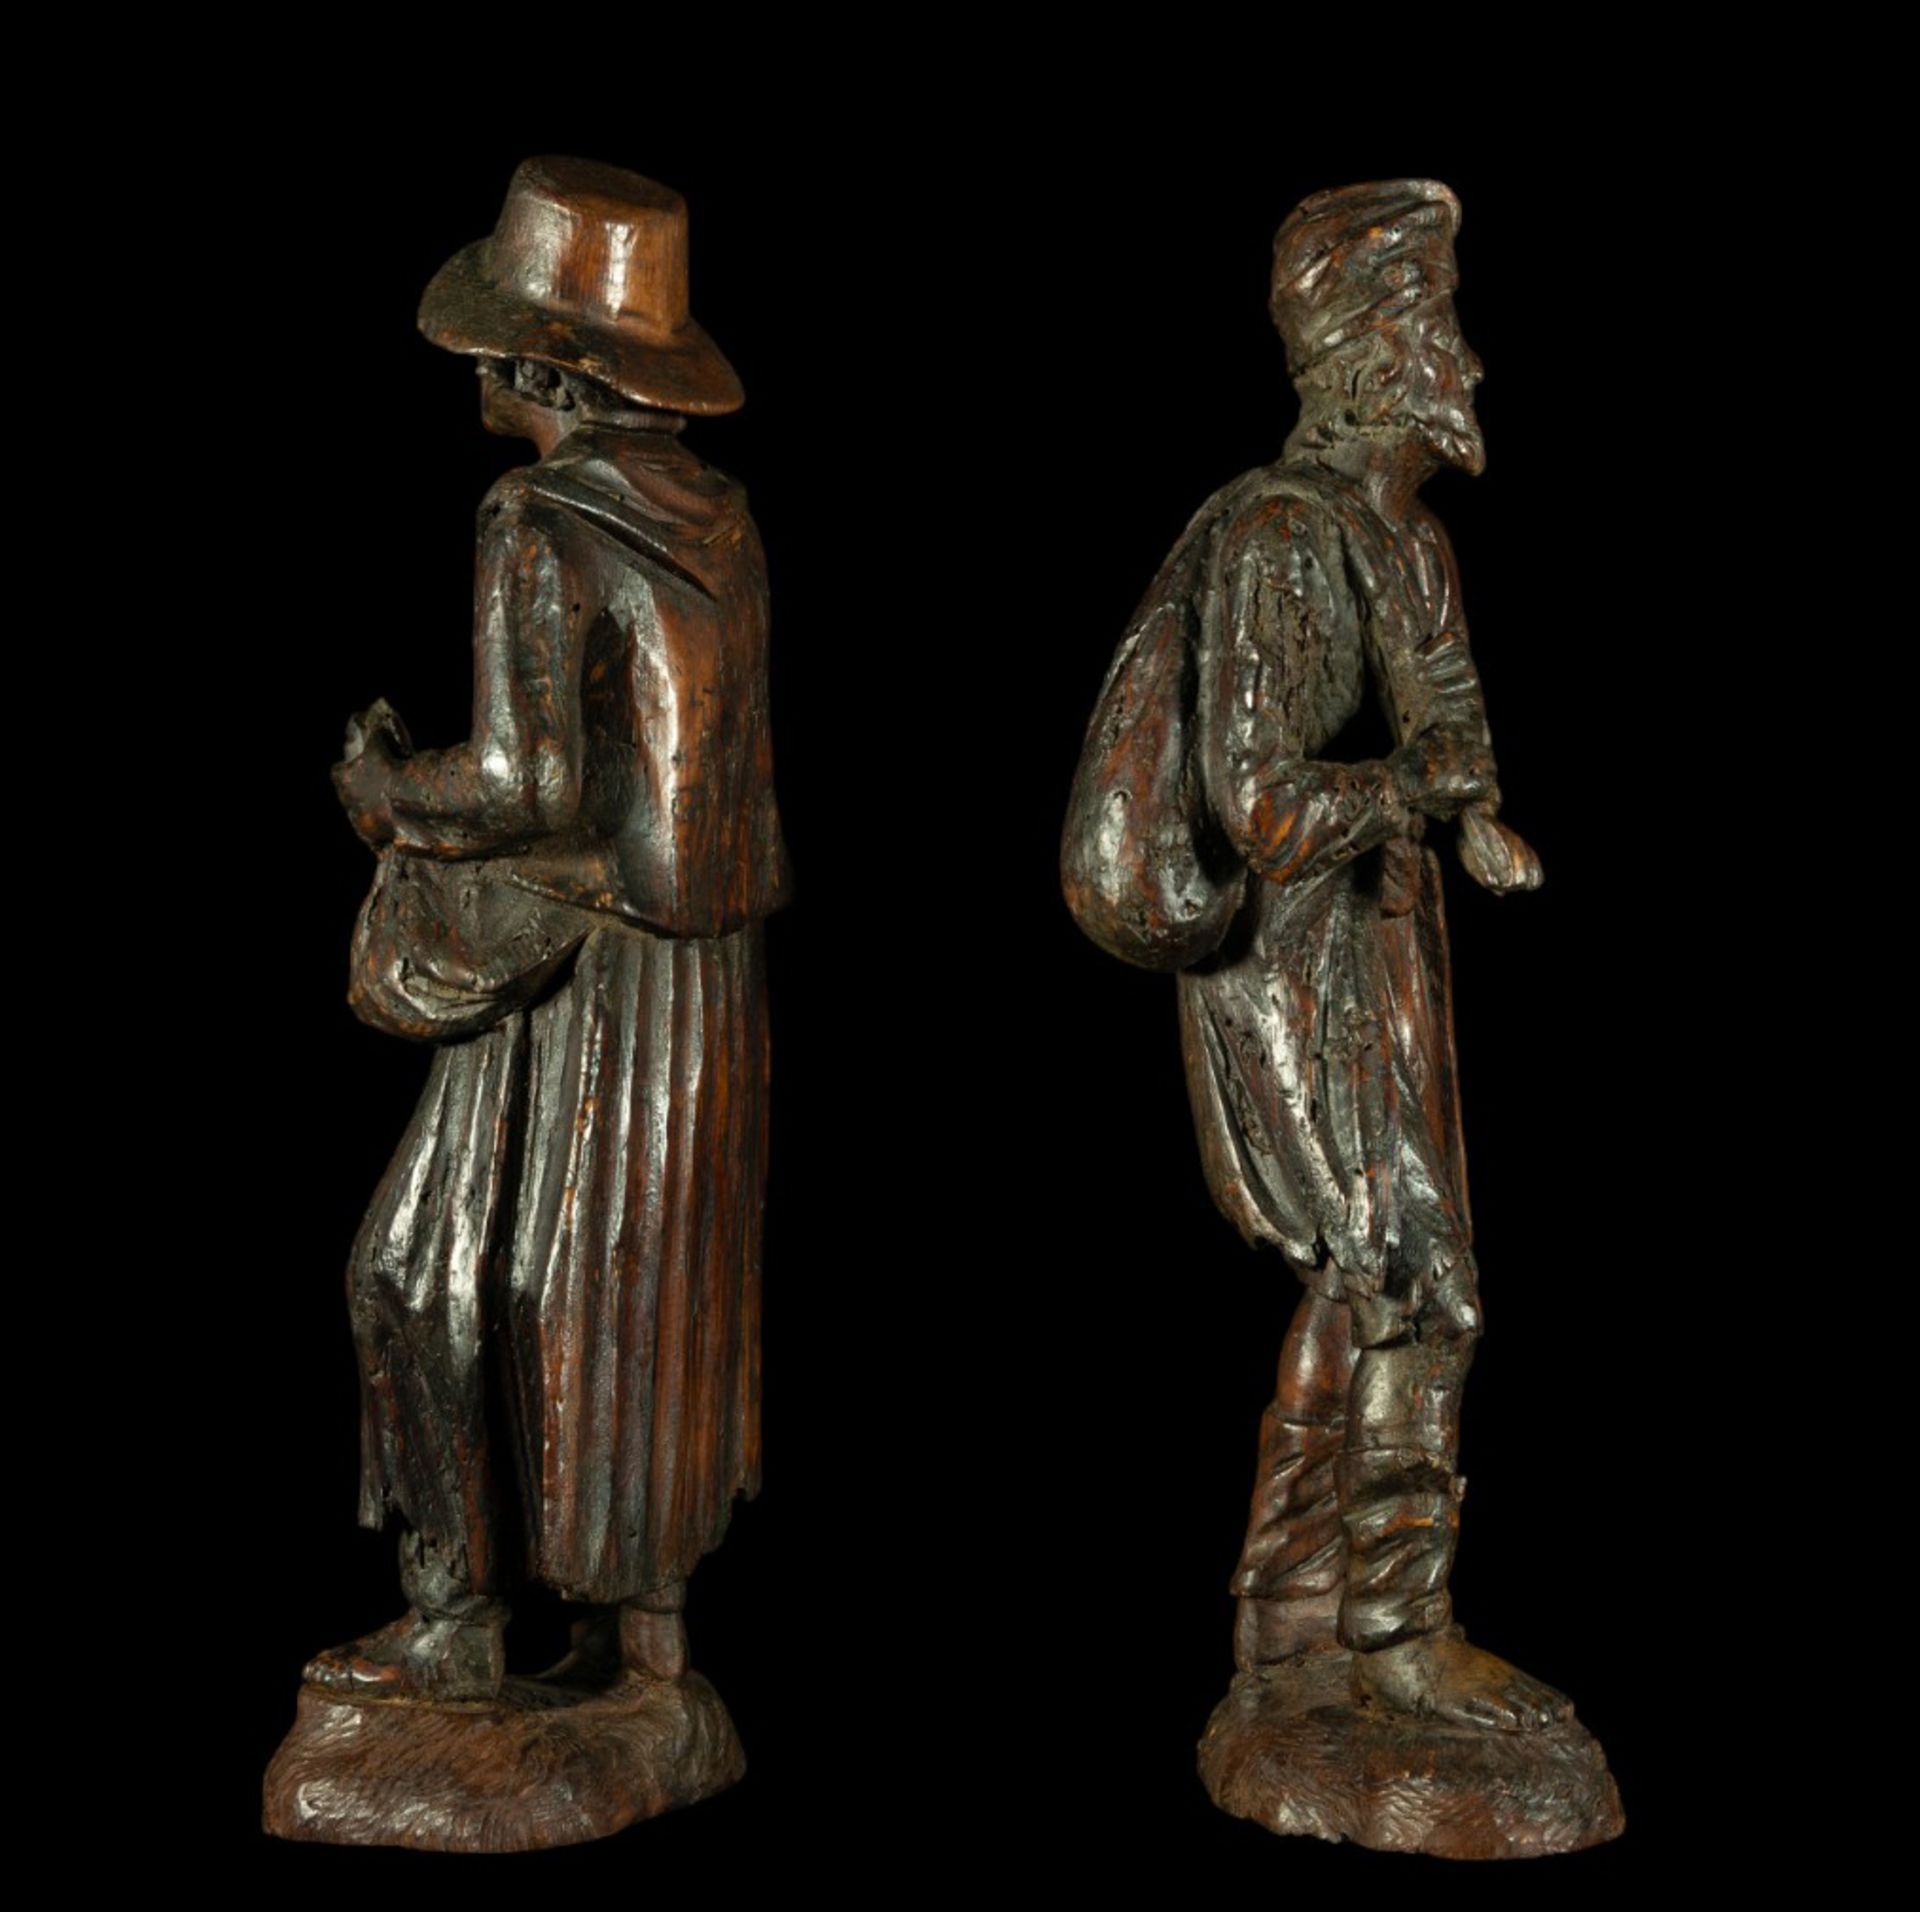 Rare pair of 18th century German Black Forest Beggars, Simon Trojer (manner of) - Image 2 of 5